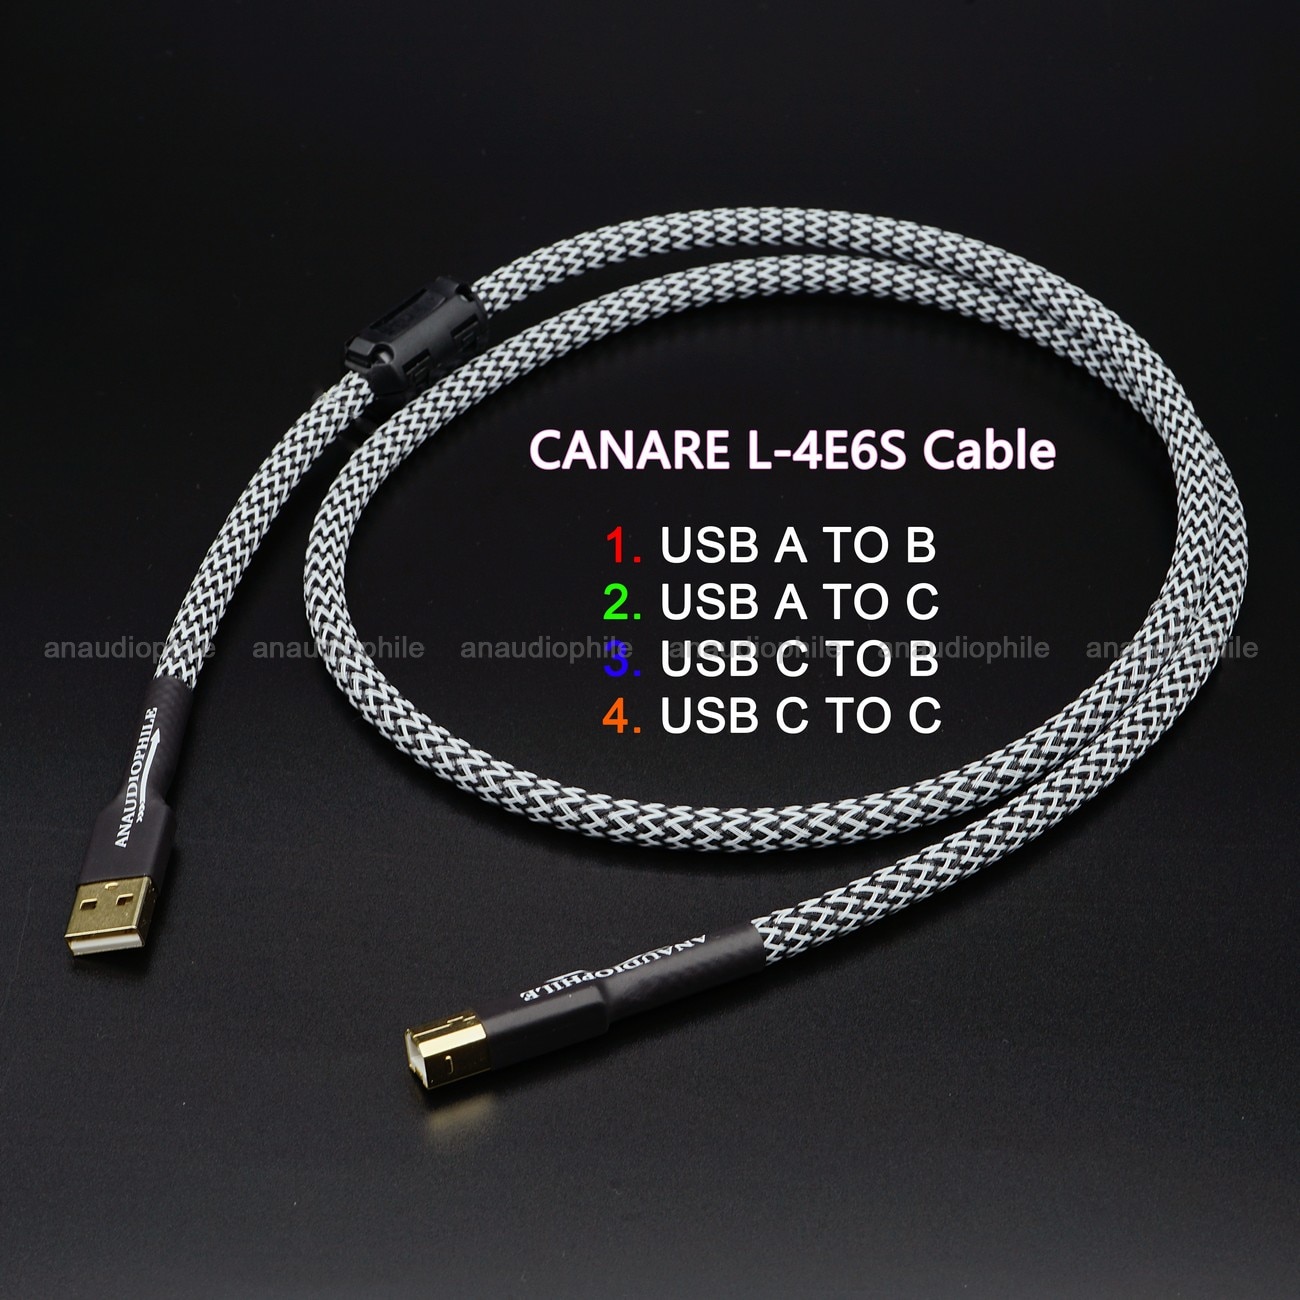 Ϻ CANARE  USB ̺, PC DAC Ͽ   ̺, USB A to B / USB A to C / USB C to C